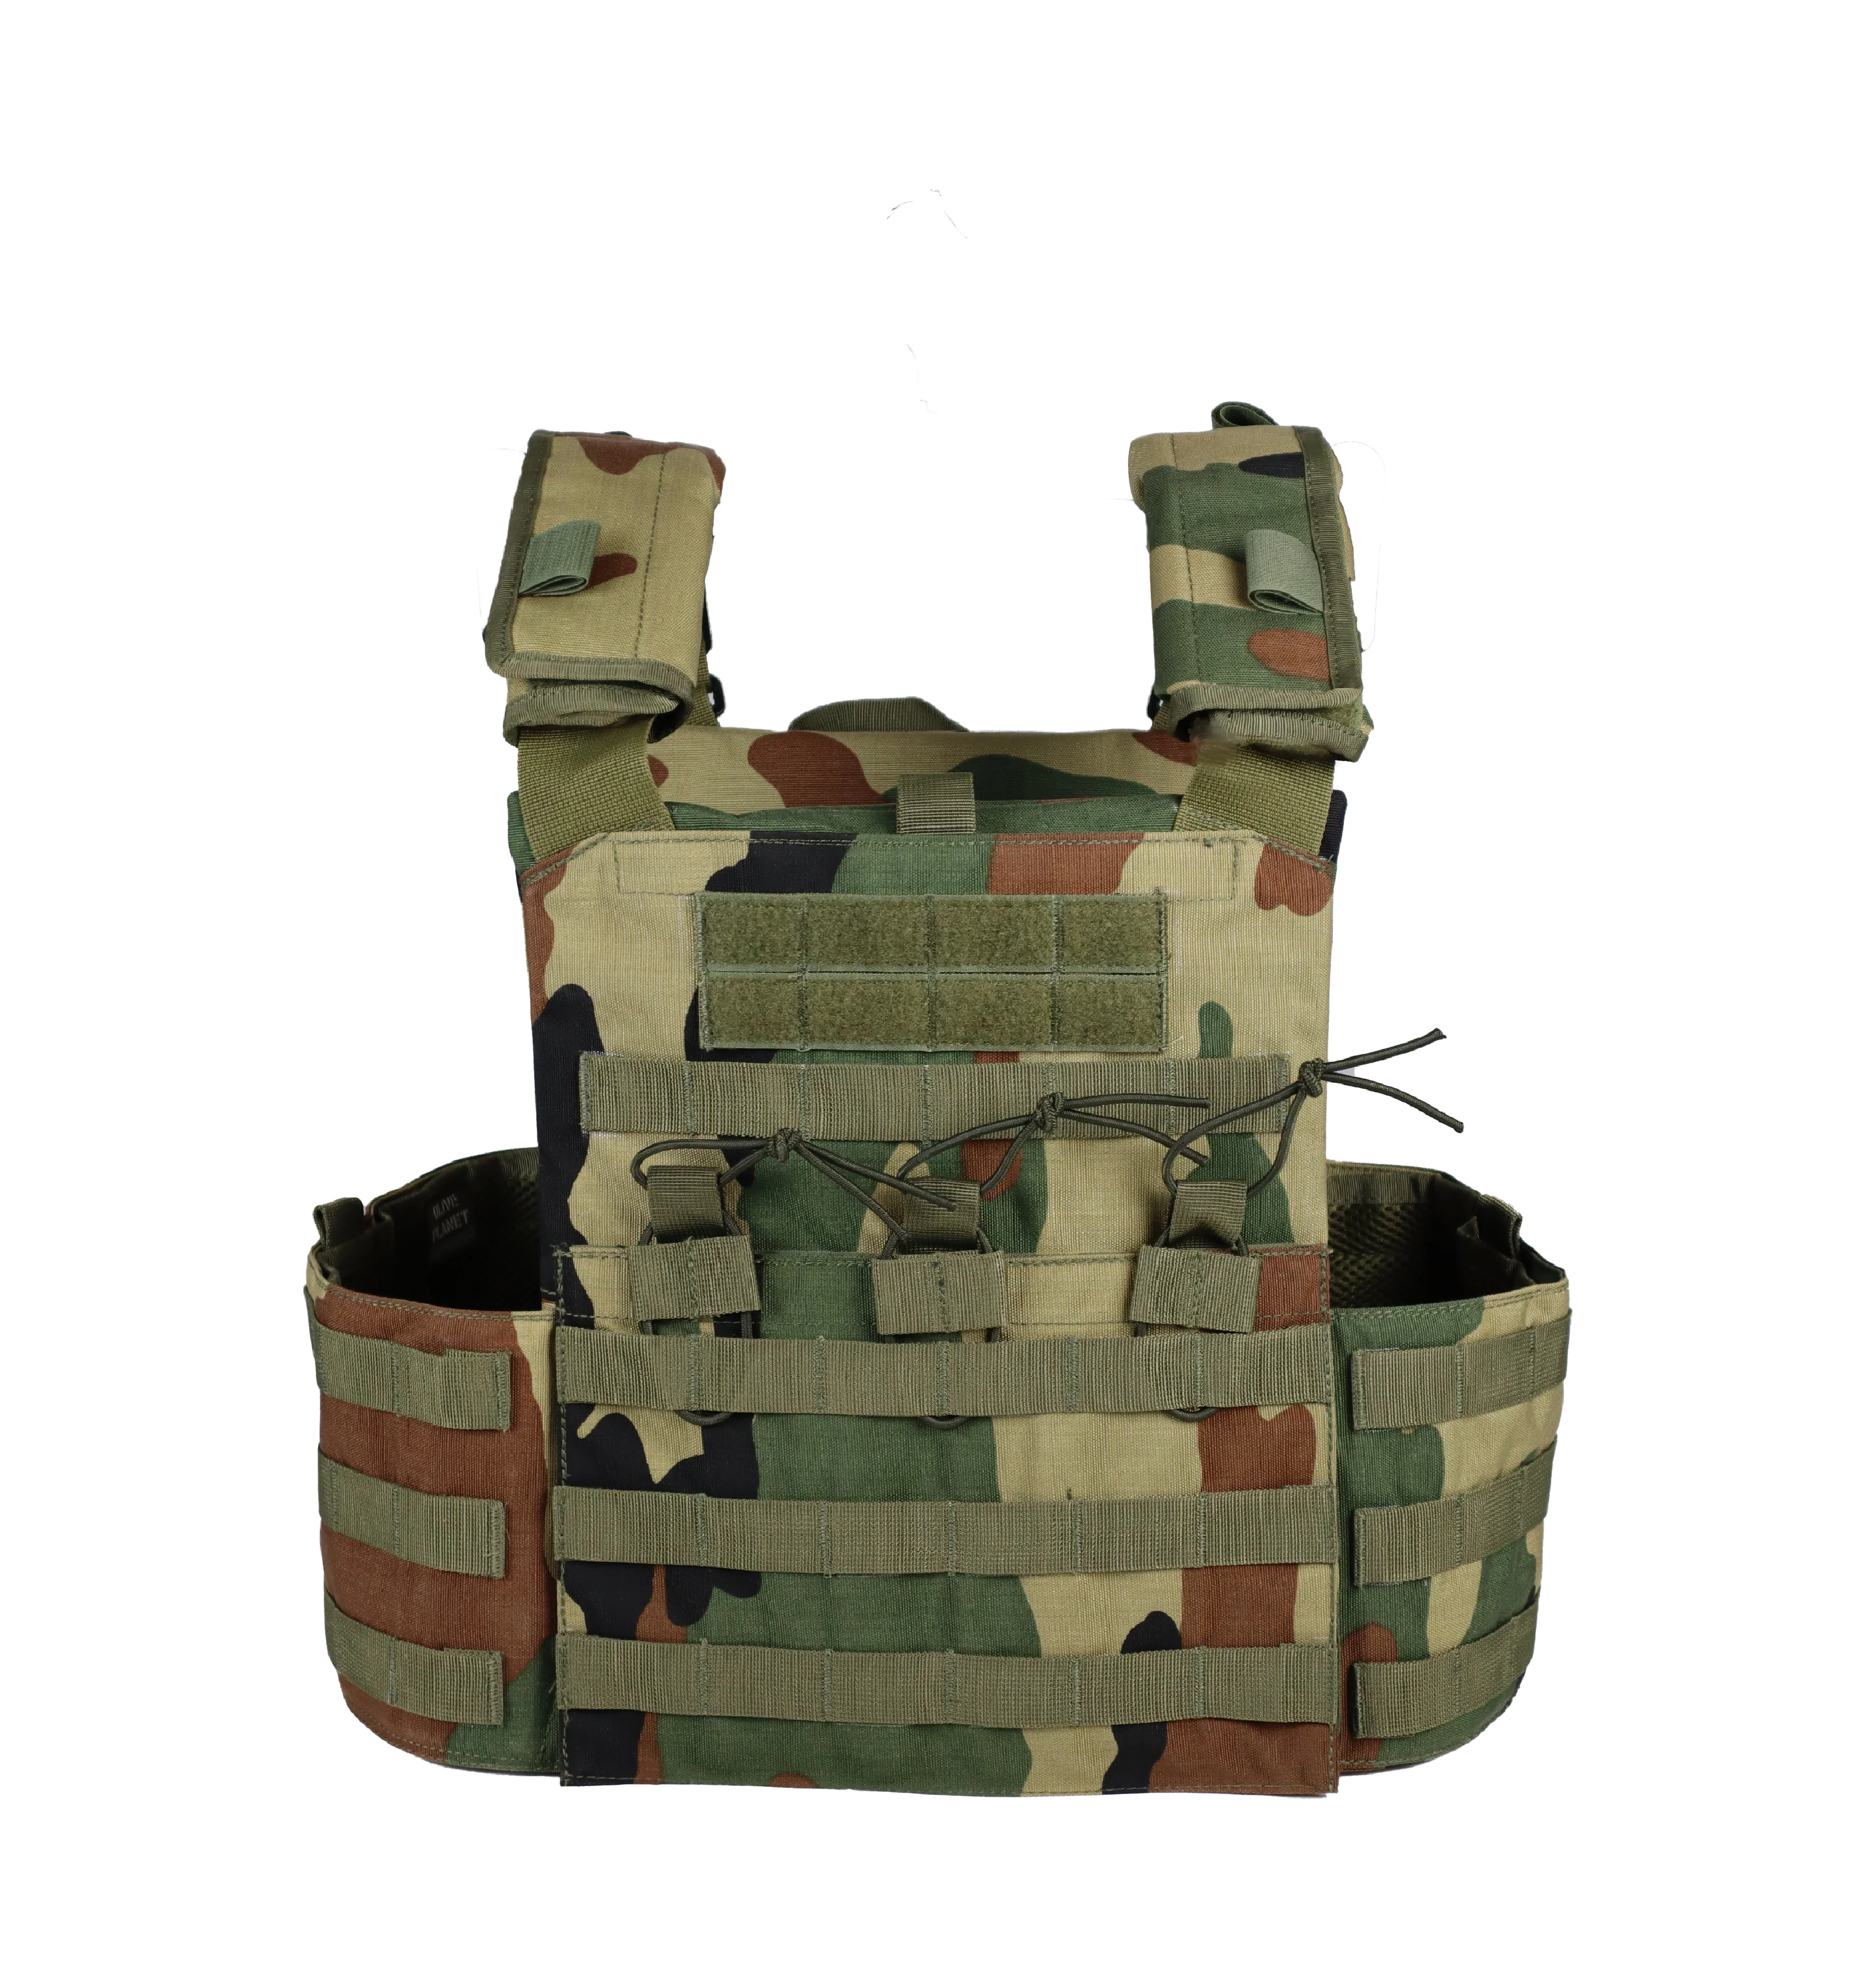 Plate Carriers for Law Enforcement: Balancing Mobility and Protection